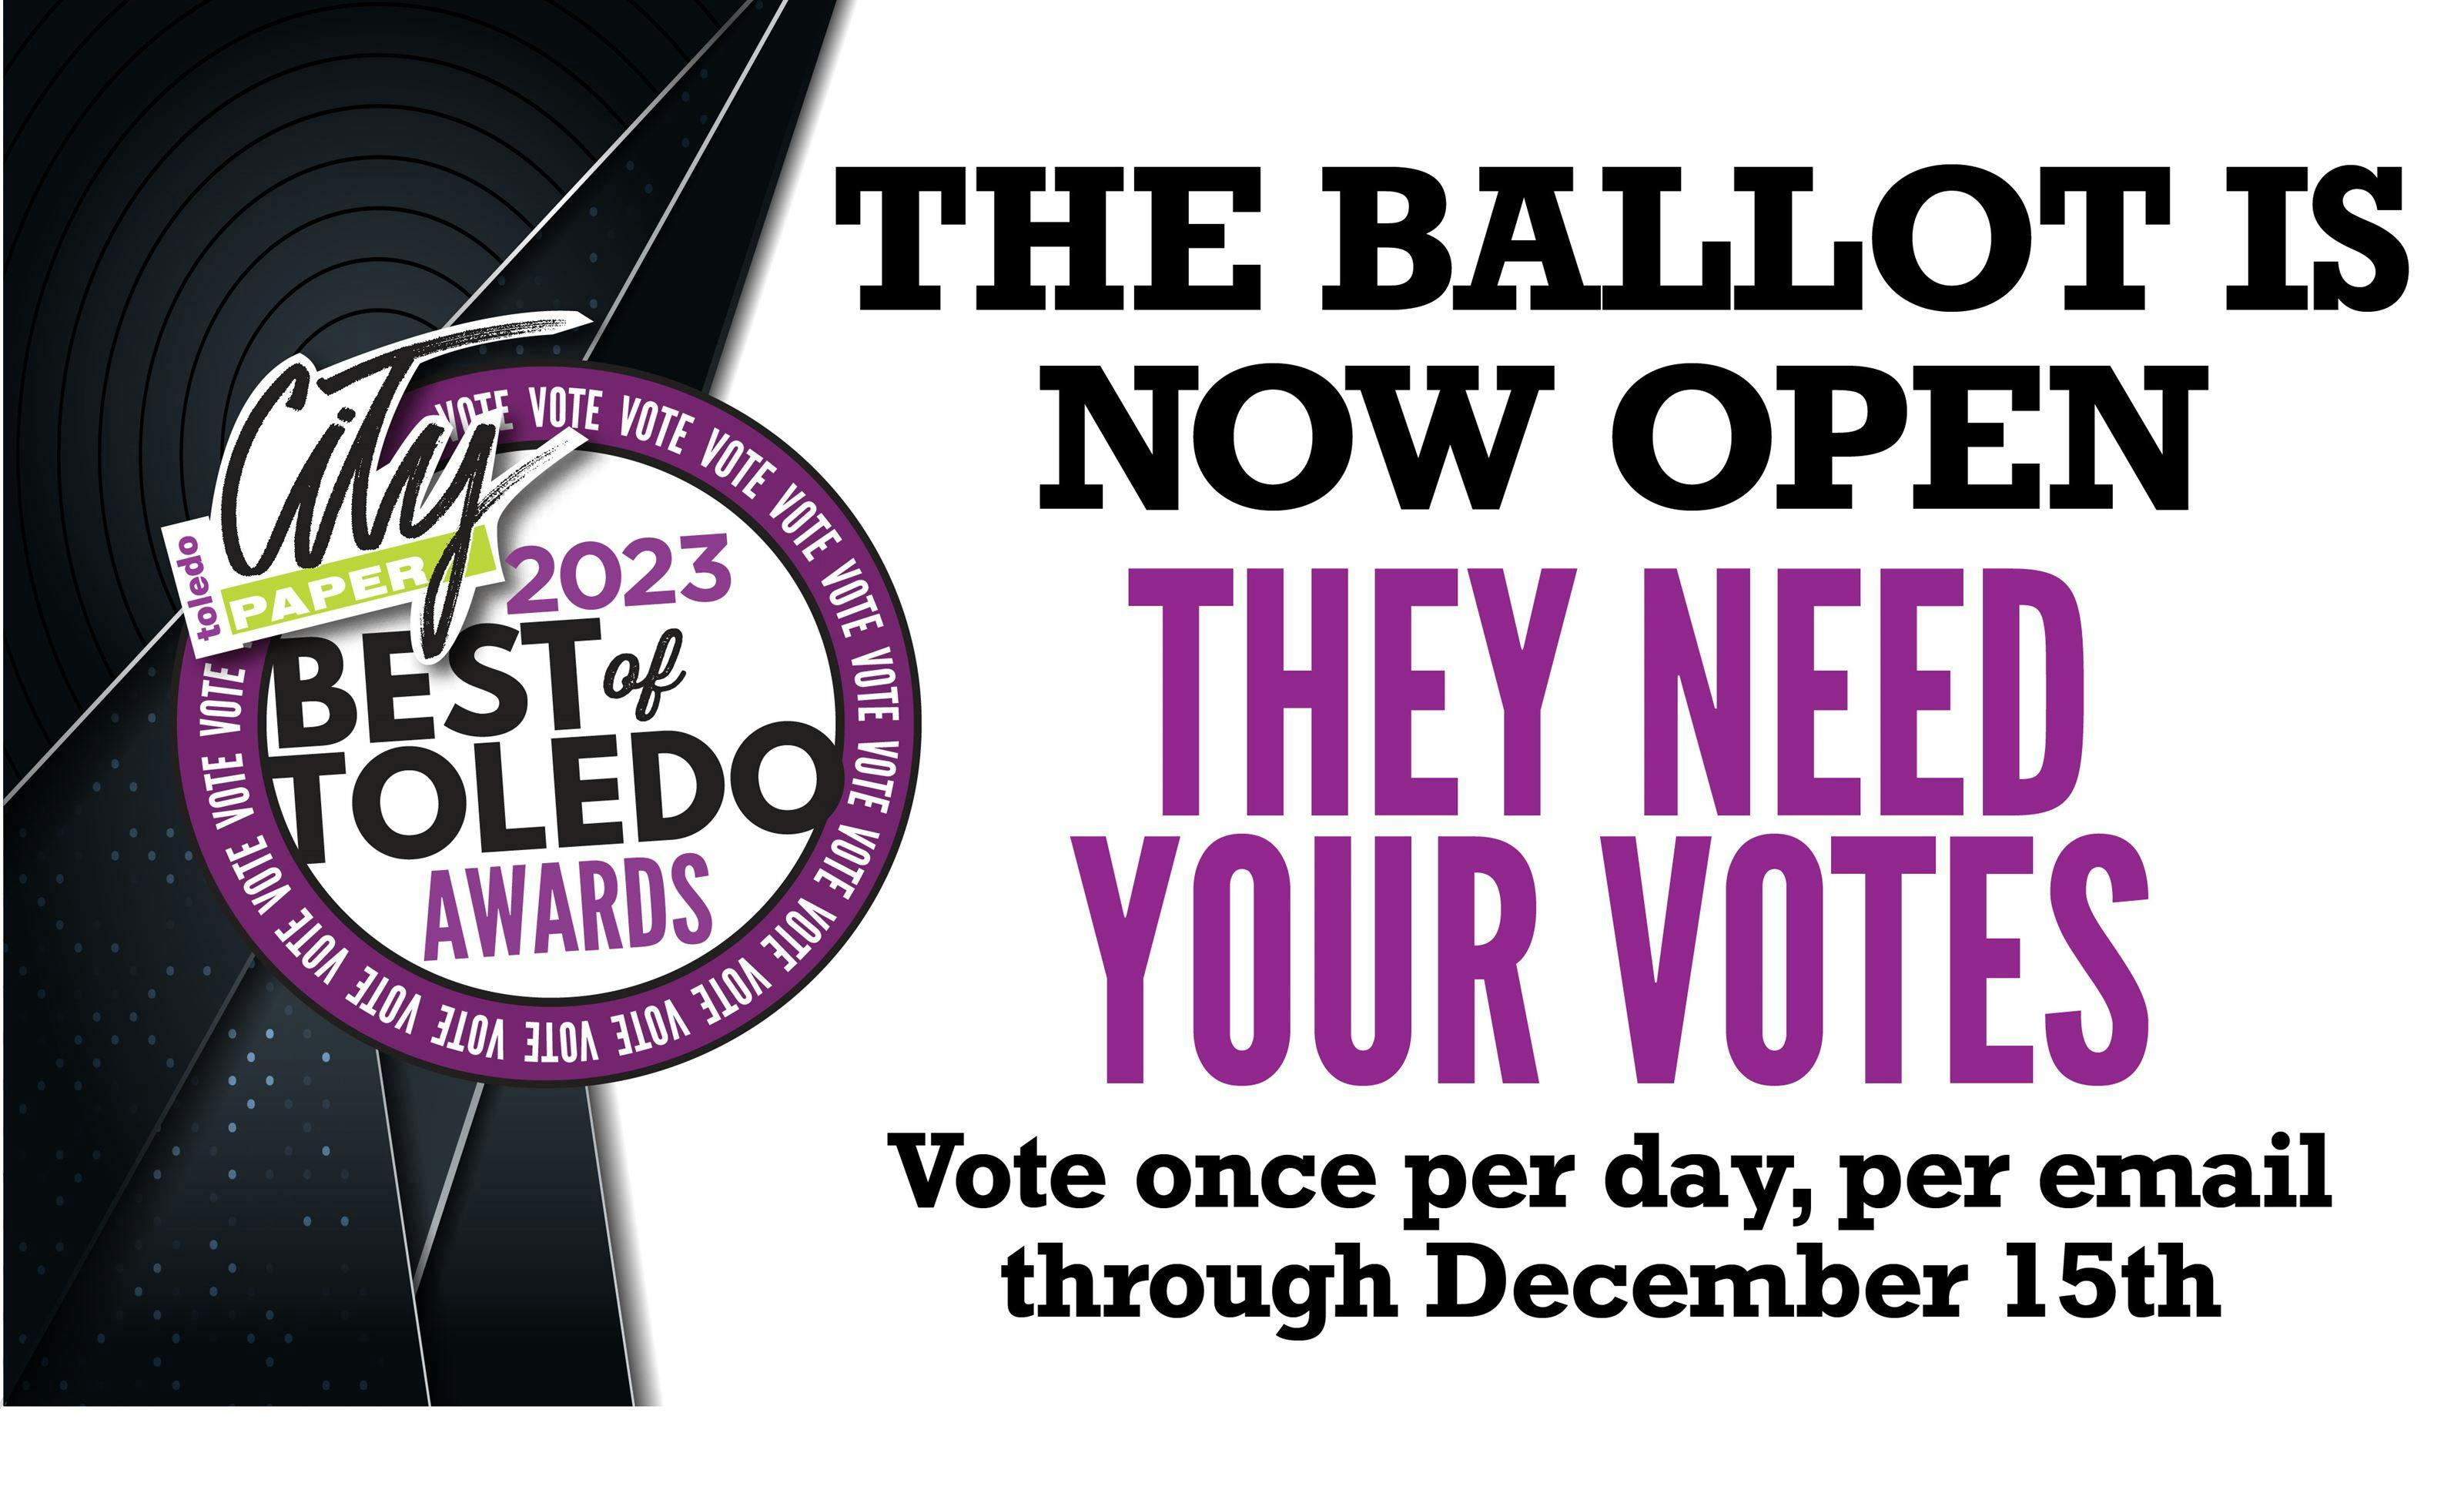 City Paper banner encouraging people to vote for Best of Toledo Awards